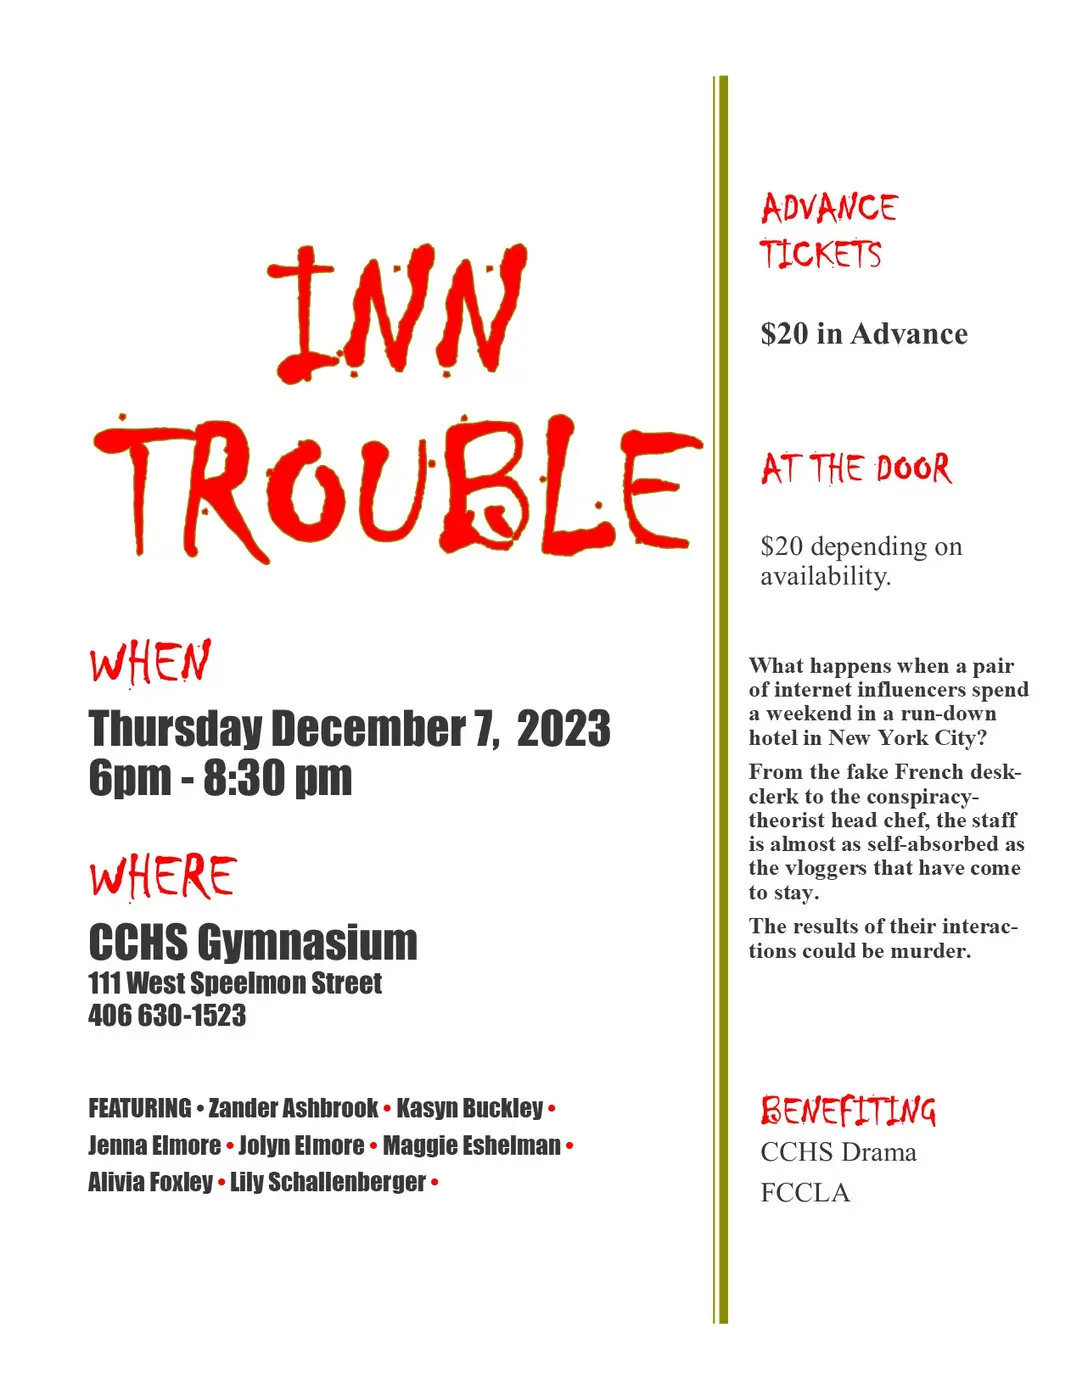 Inn Trouble: A Dinner Theater presented by CCHS Drama and food provided by FCCLA.  Tickets $20.  Copy: What happens when a pair of influencers spend a weekend in a run-down hotel in New York City? From the fake French desk-clerk to the conspiracy-theorist head chef, the staff is almost as self-absorbed as the vloggers that have come to stay.  The results of their interactions could be murder.